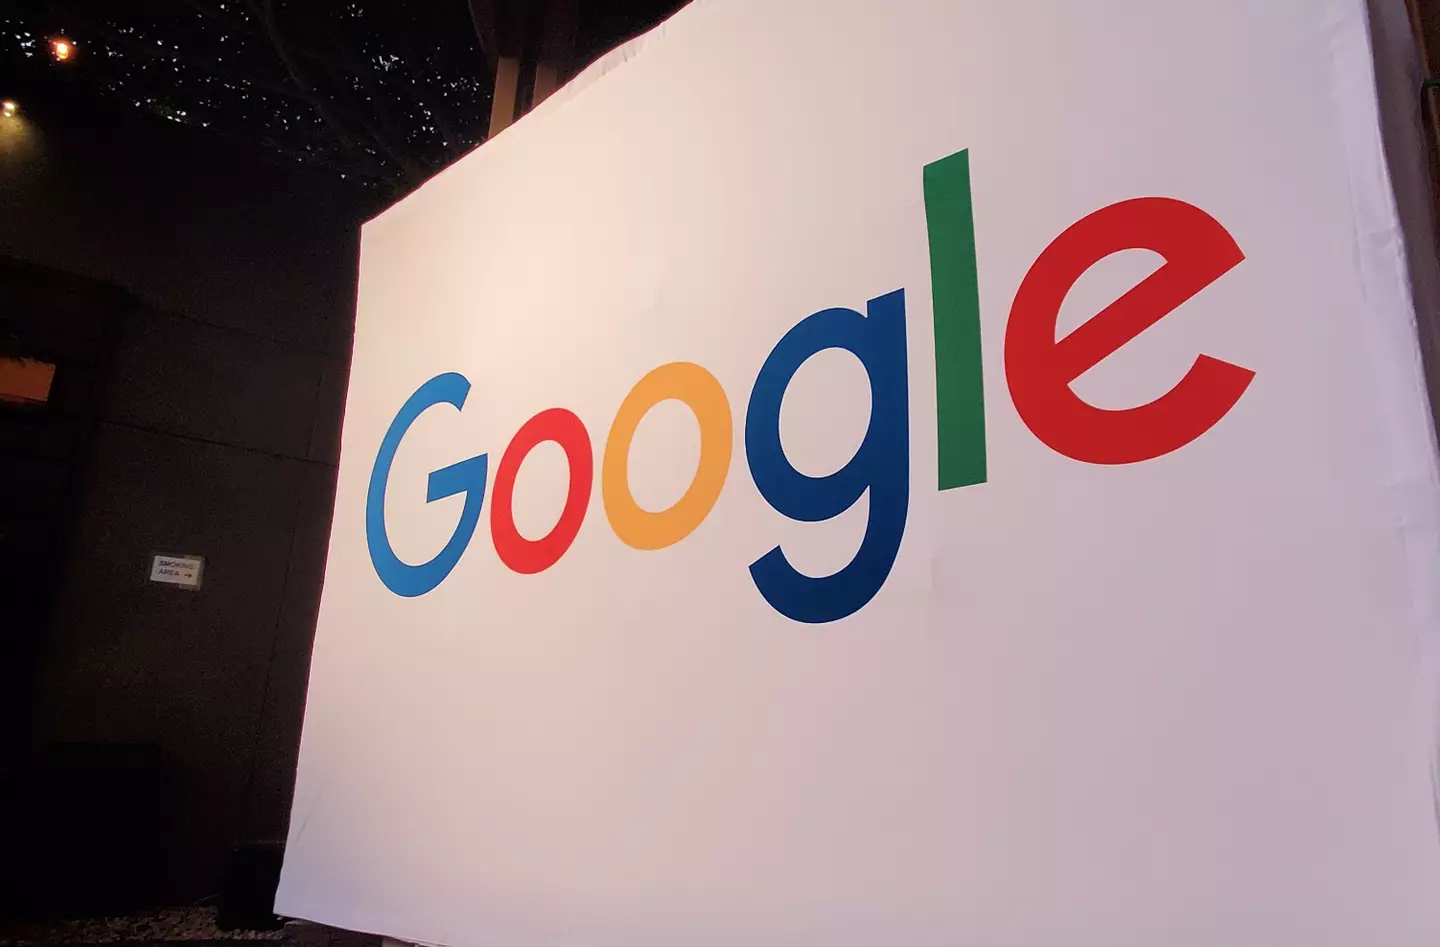 Google has agreed to a number of terms as part of the settlement.